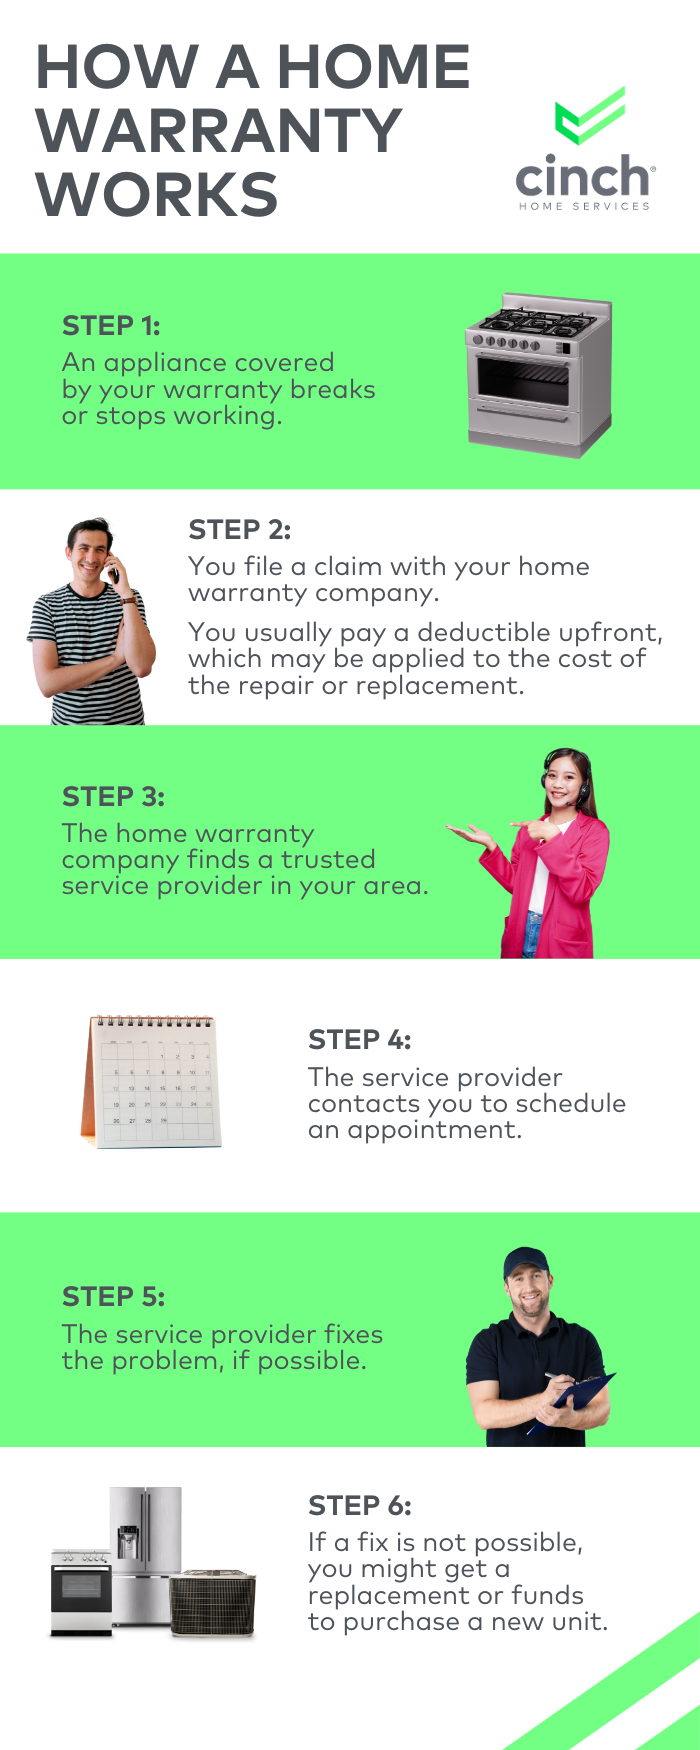 infographic showing how a home warranty works